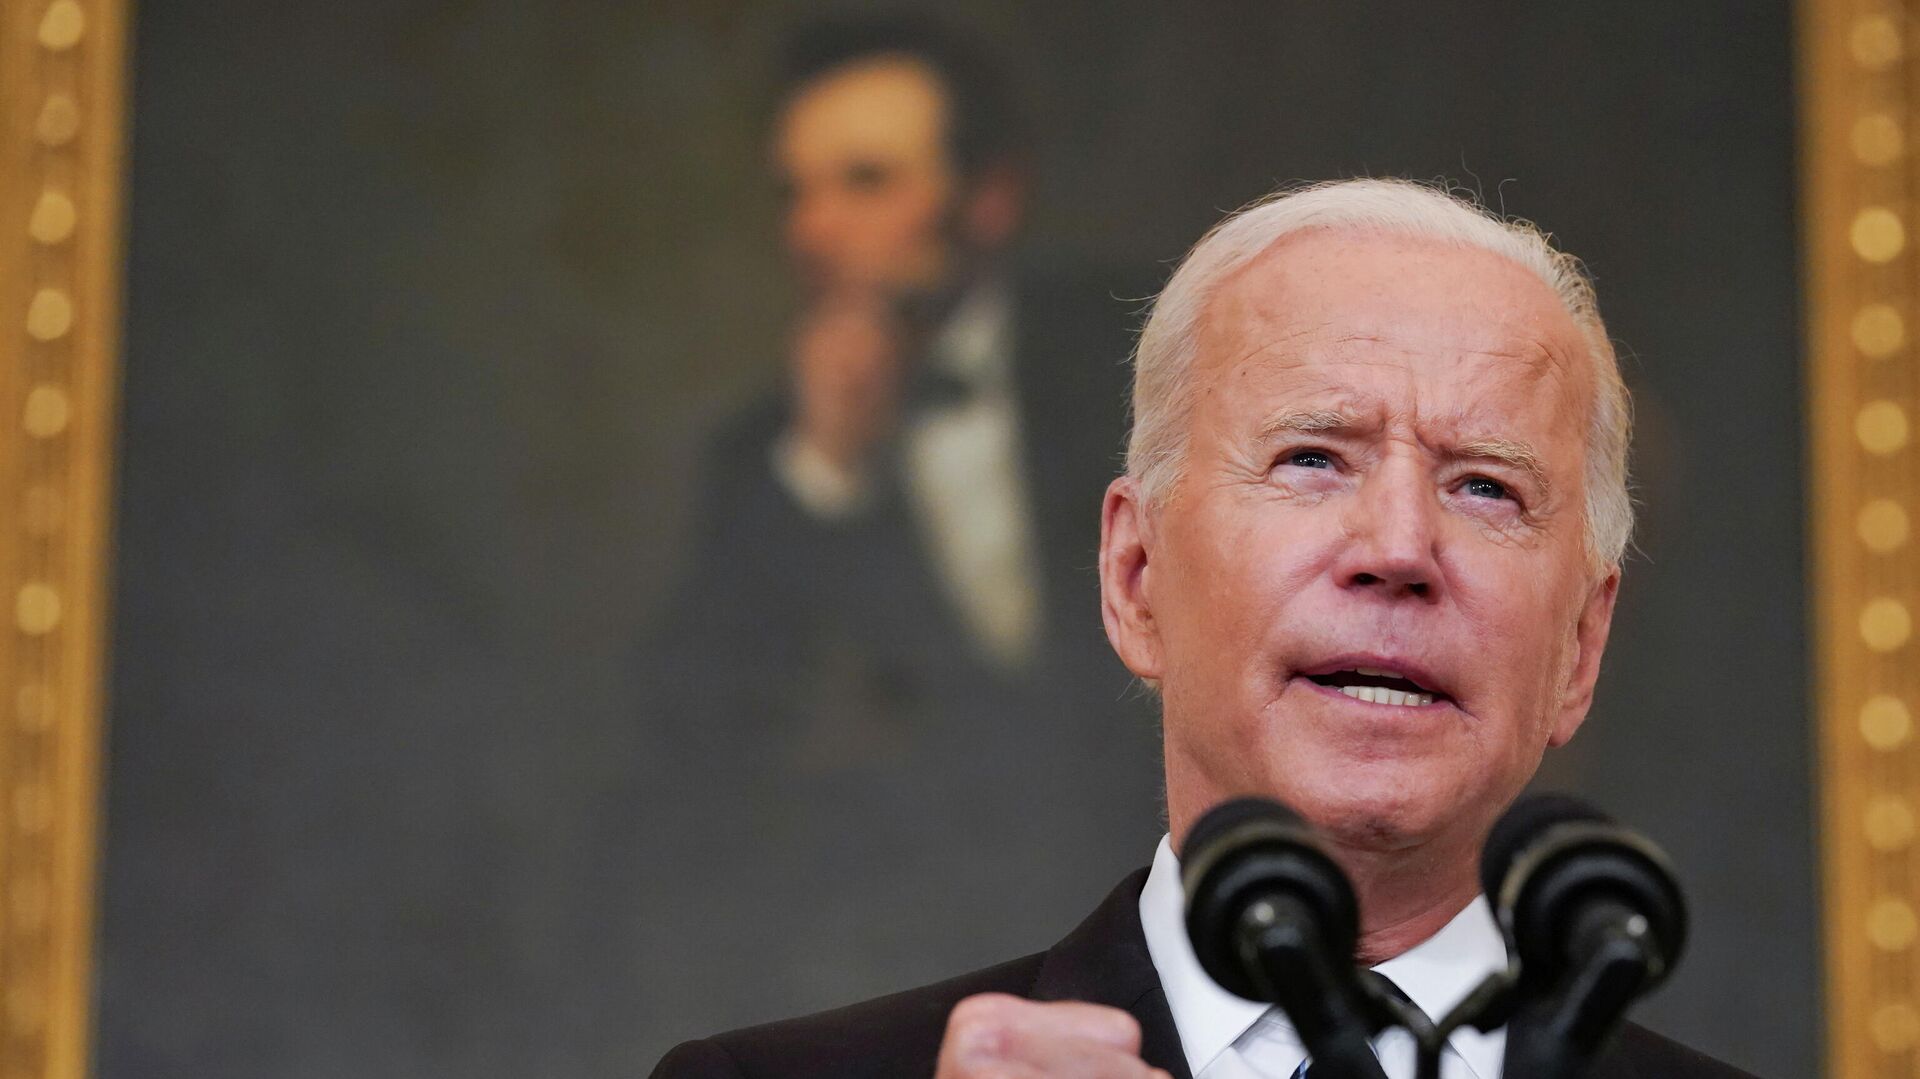 US President Joe Biden delivers remarks on the Delta variant and his administration's efforts to increase vaccinations, from the State Dining Room of the White House in Washington, US, September 9, 2021 - Sputnik International, 1920, 11.09.2021